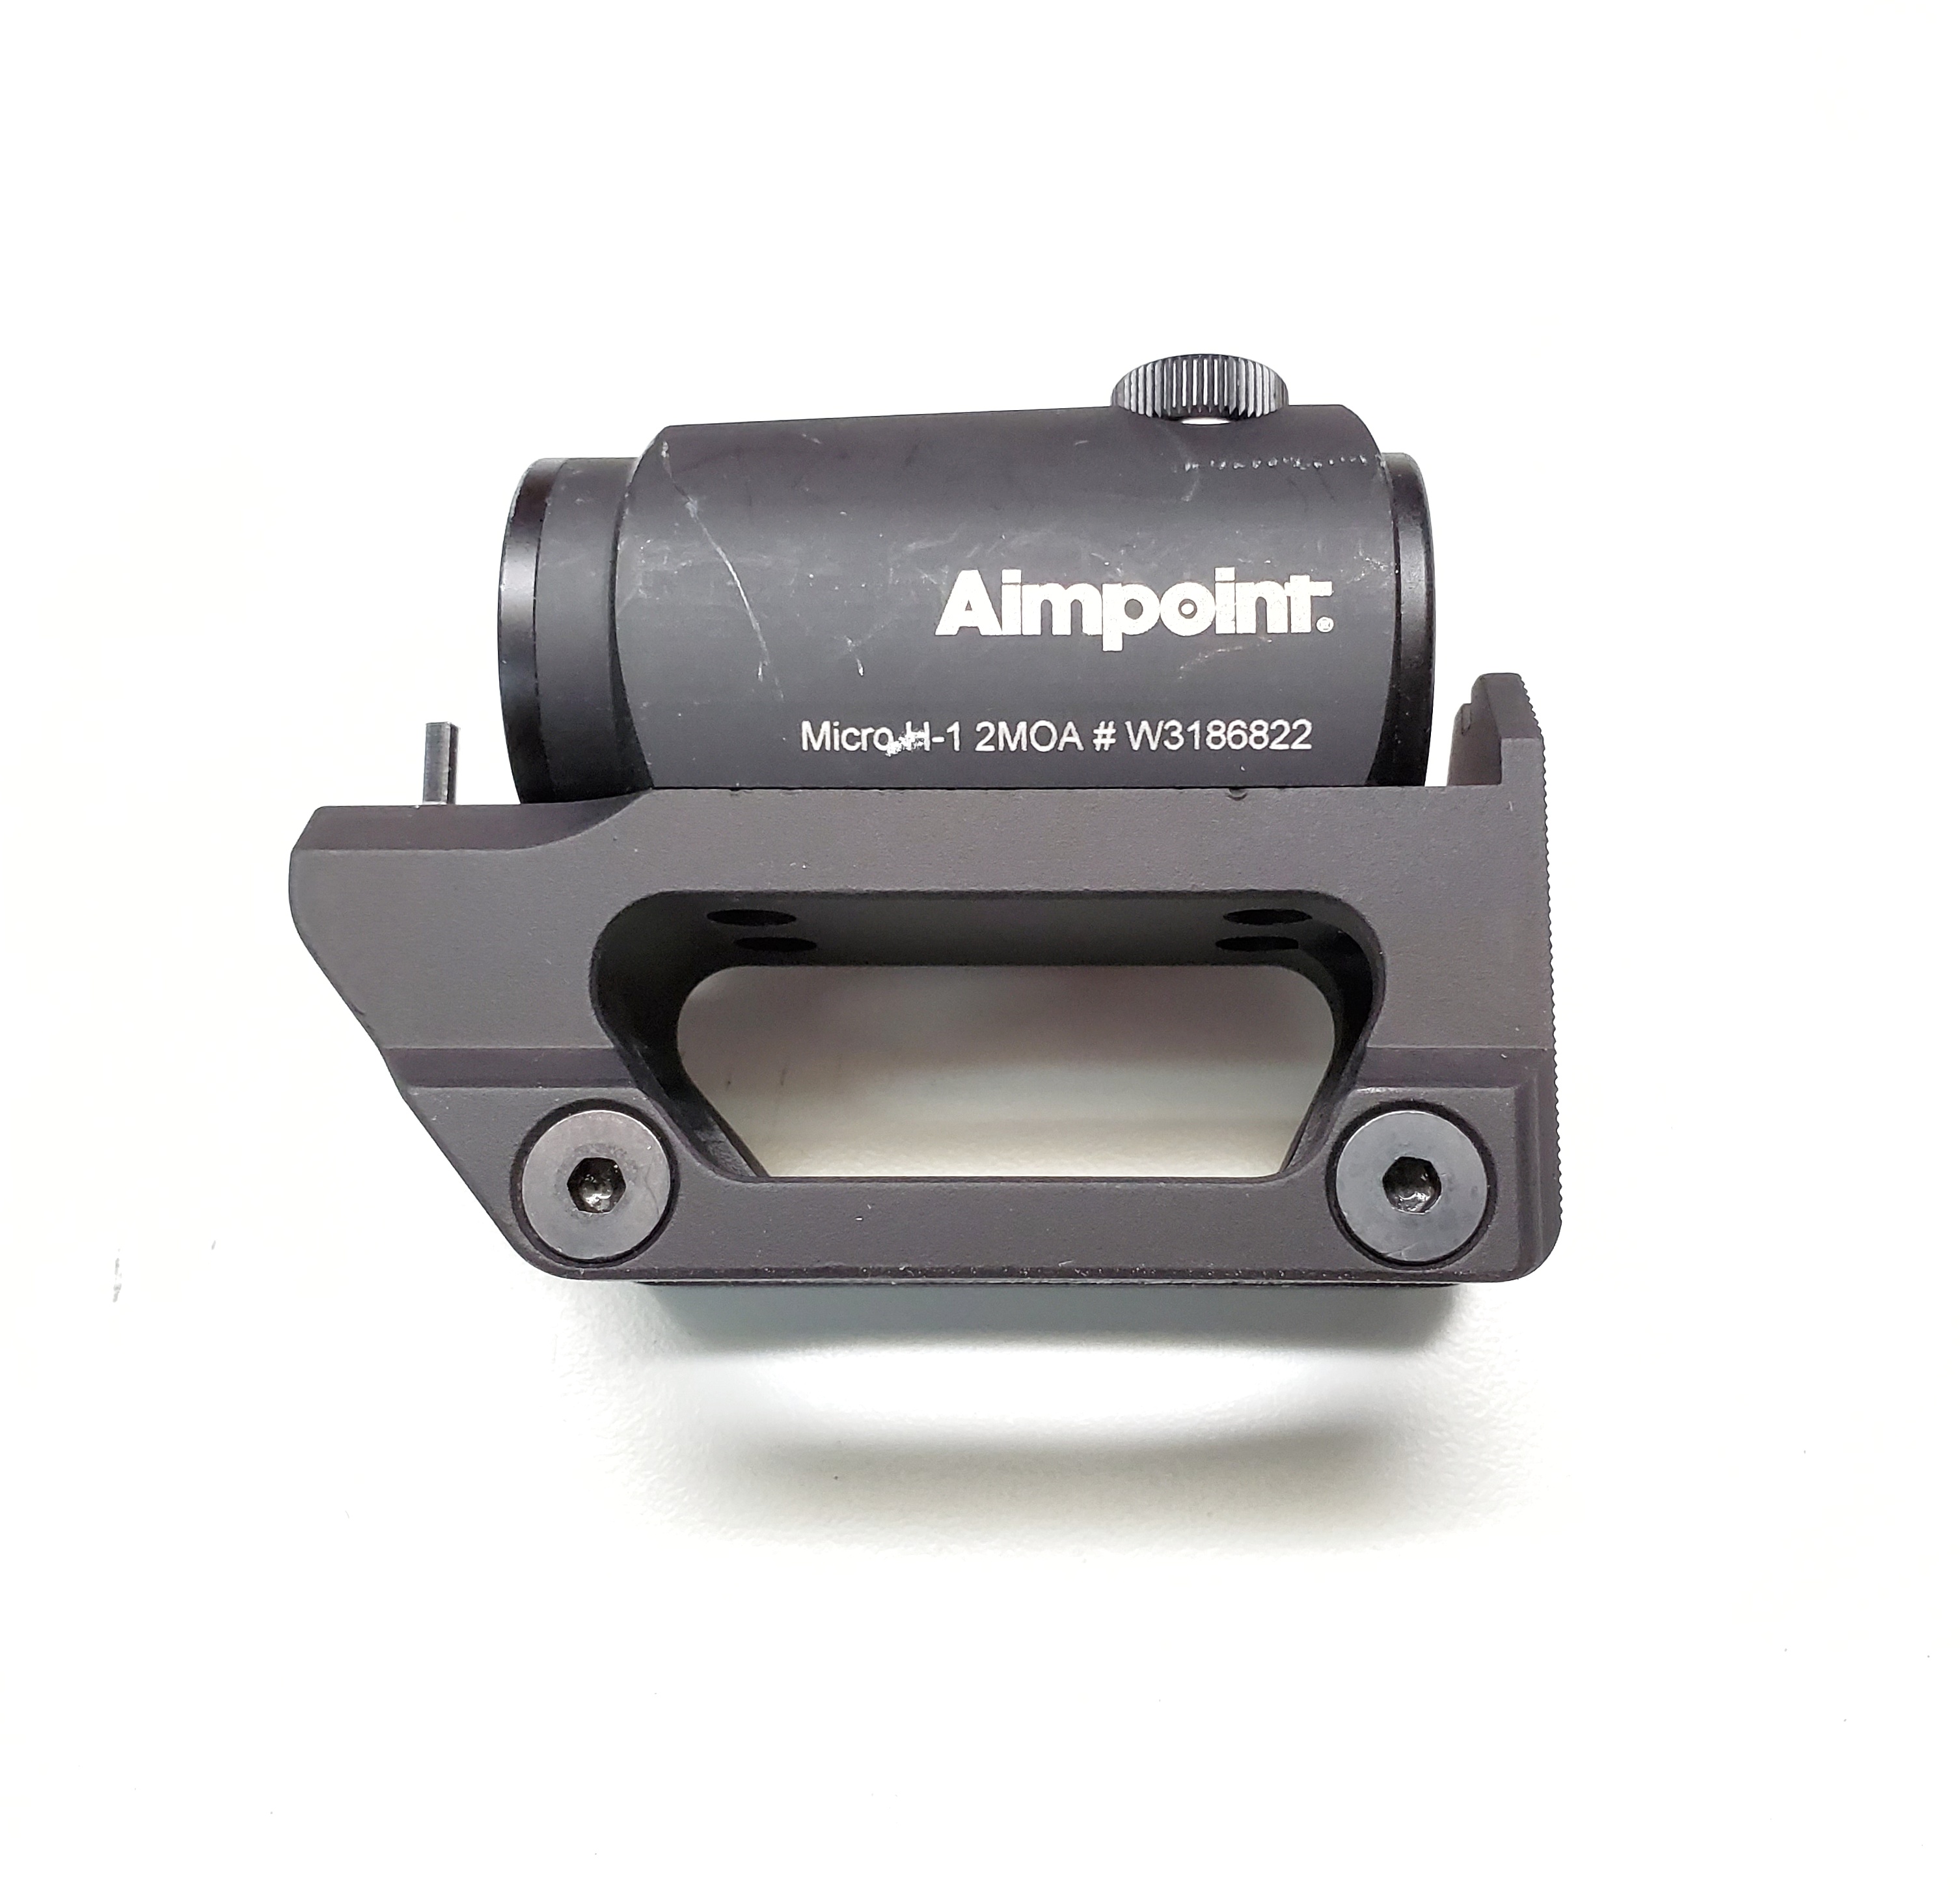 ANVL UKON T1 Red Dot Sight Mount | $10.00 Off w/ Free Shipping and Handling